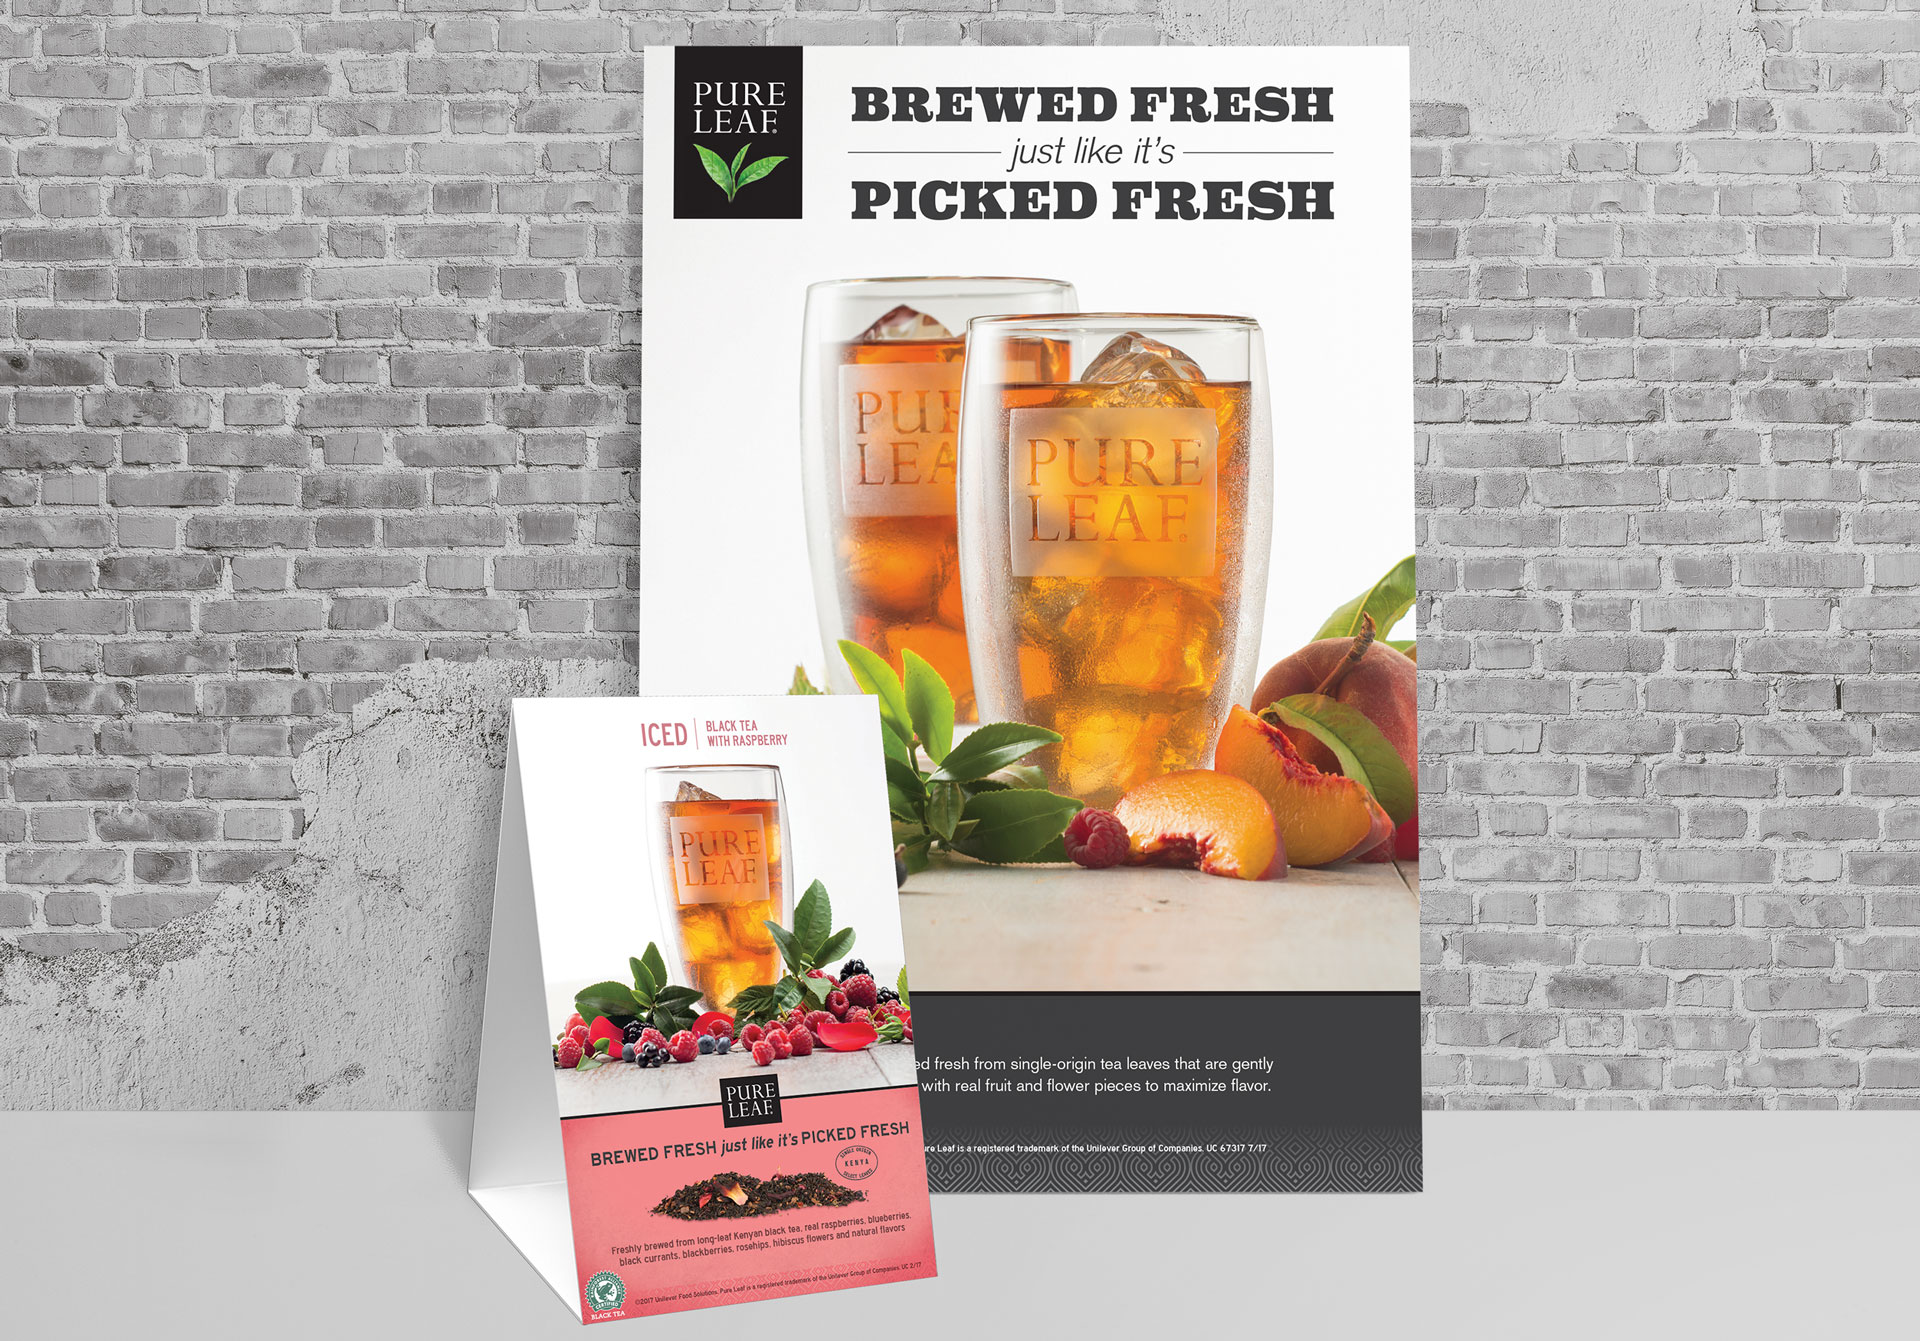 Pure Leaf Iced Tea point of sale materials